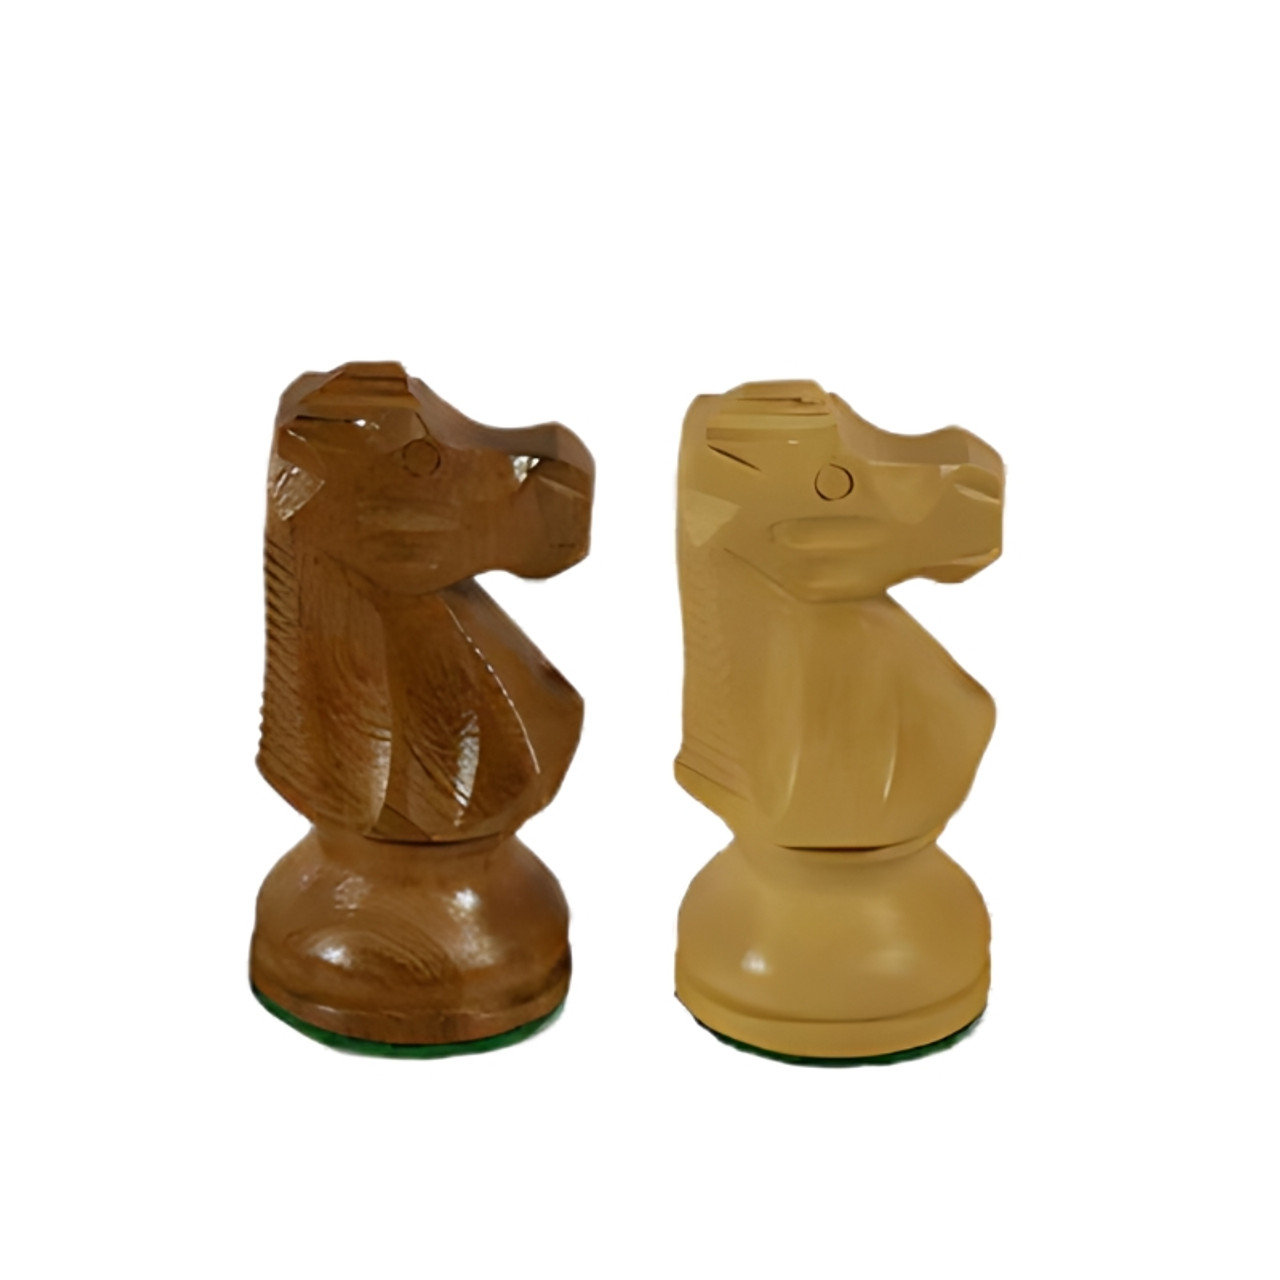 The Adeline Chess Pieces - Kirkwood with 3.5" King black and white knight